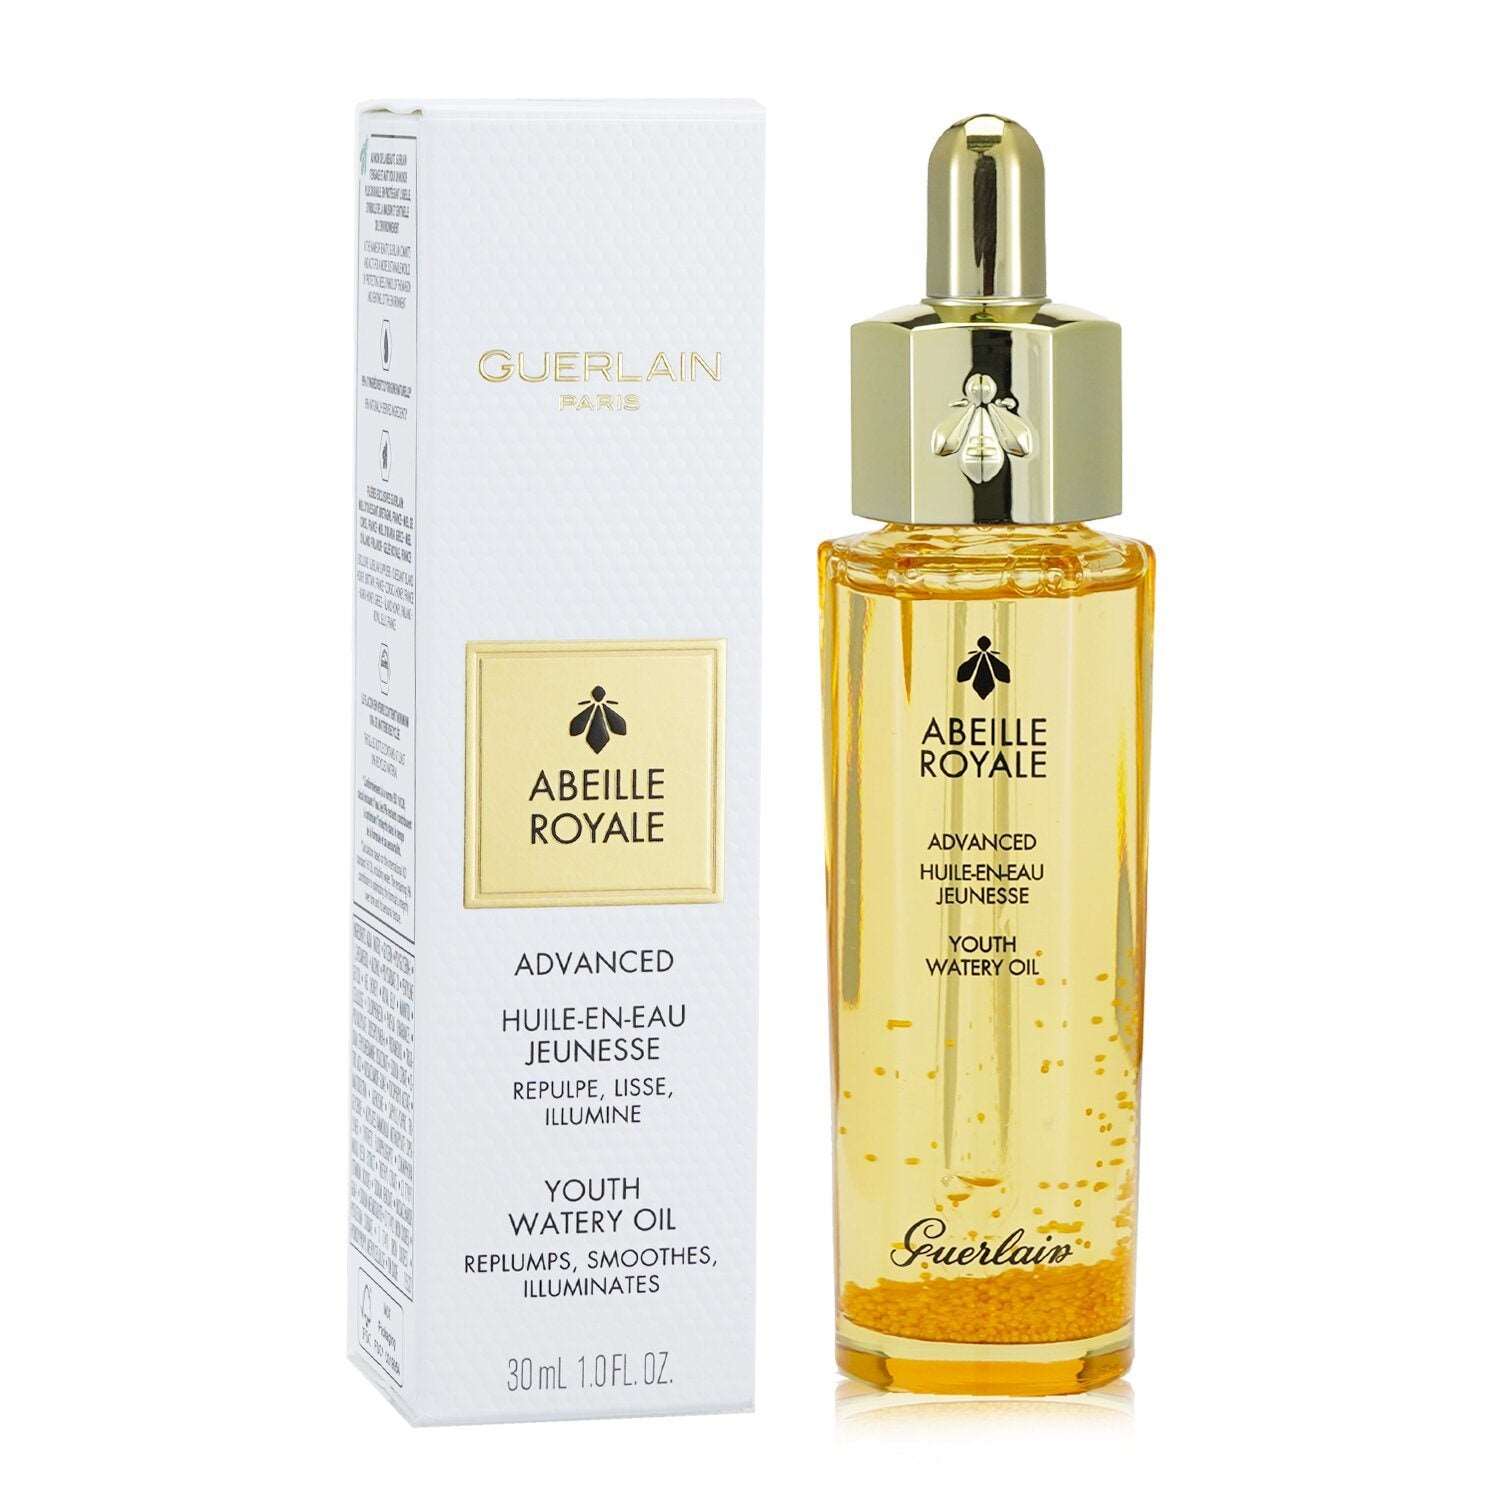 GUERLAIN - Abeille Royale Advanced Youth Watery Oil 616165 30ml/1oz~3P's Inclusive Beauty